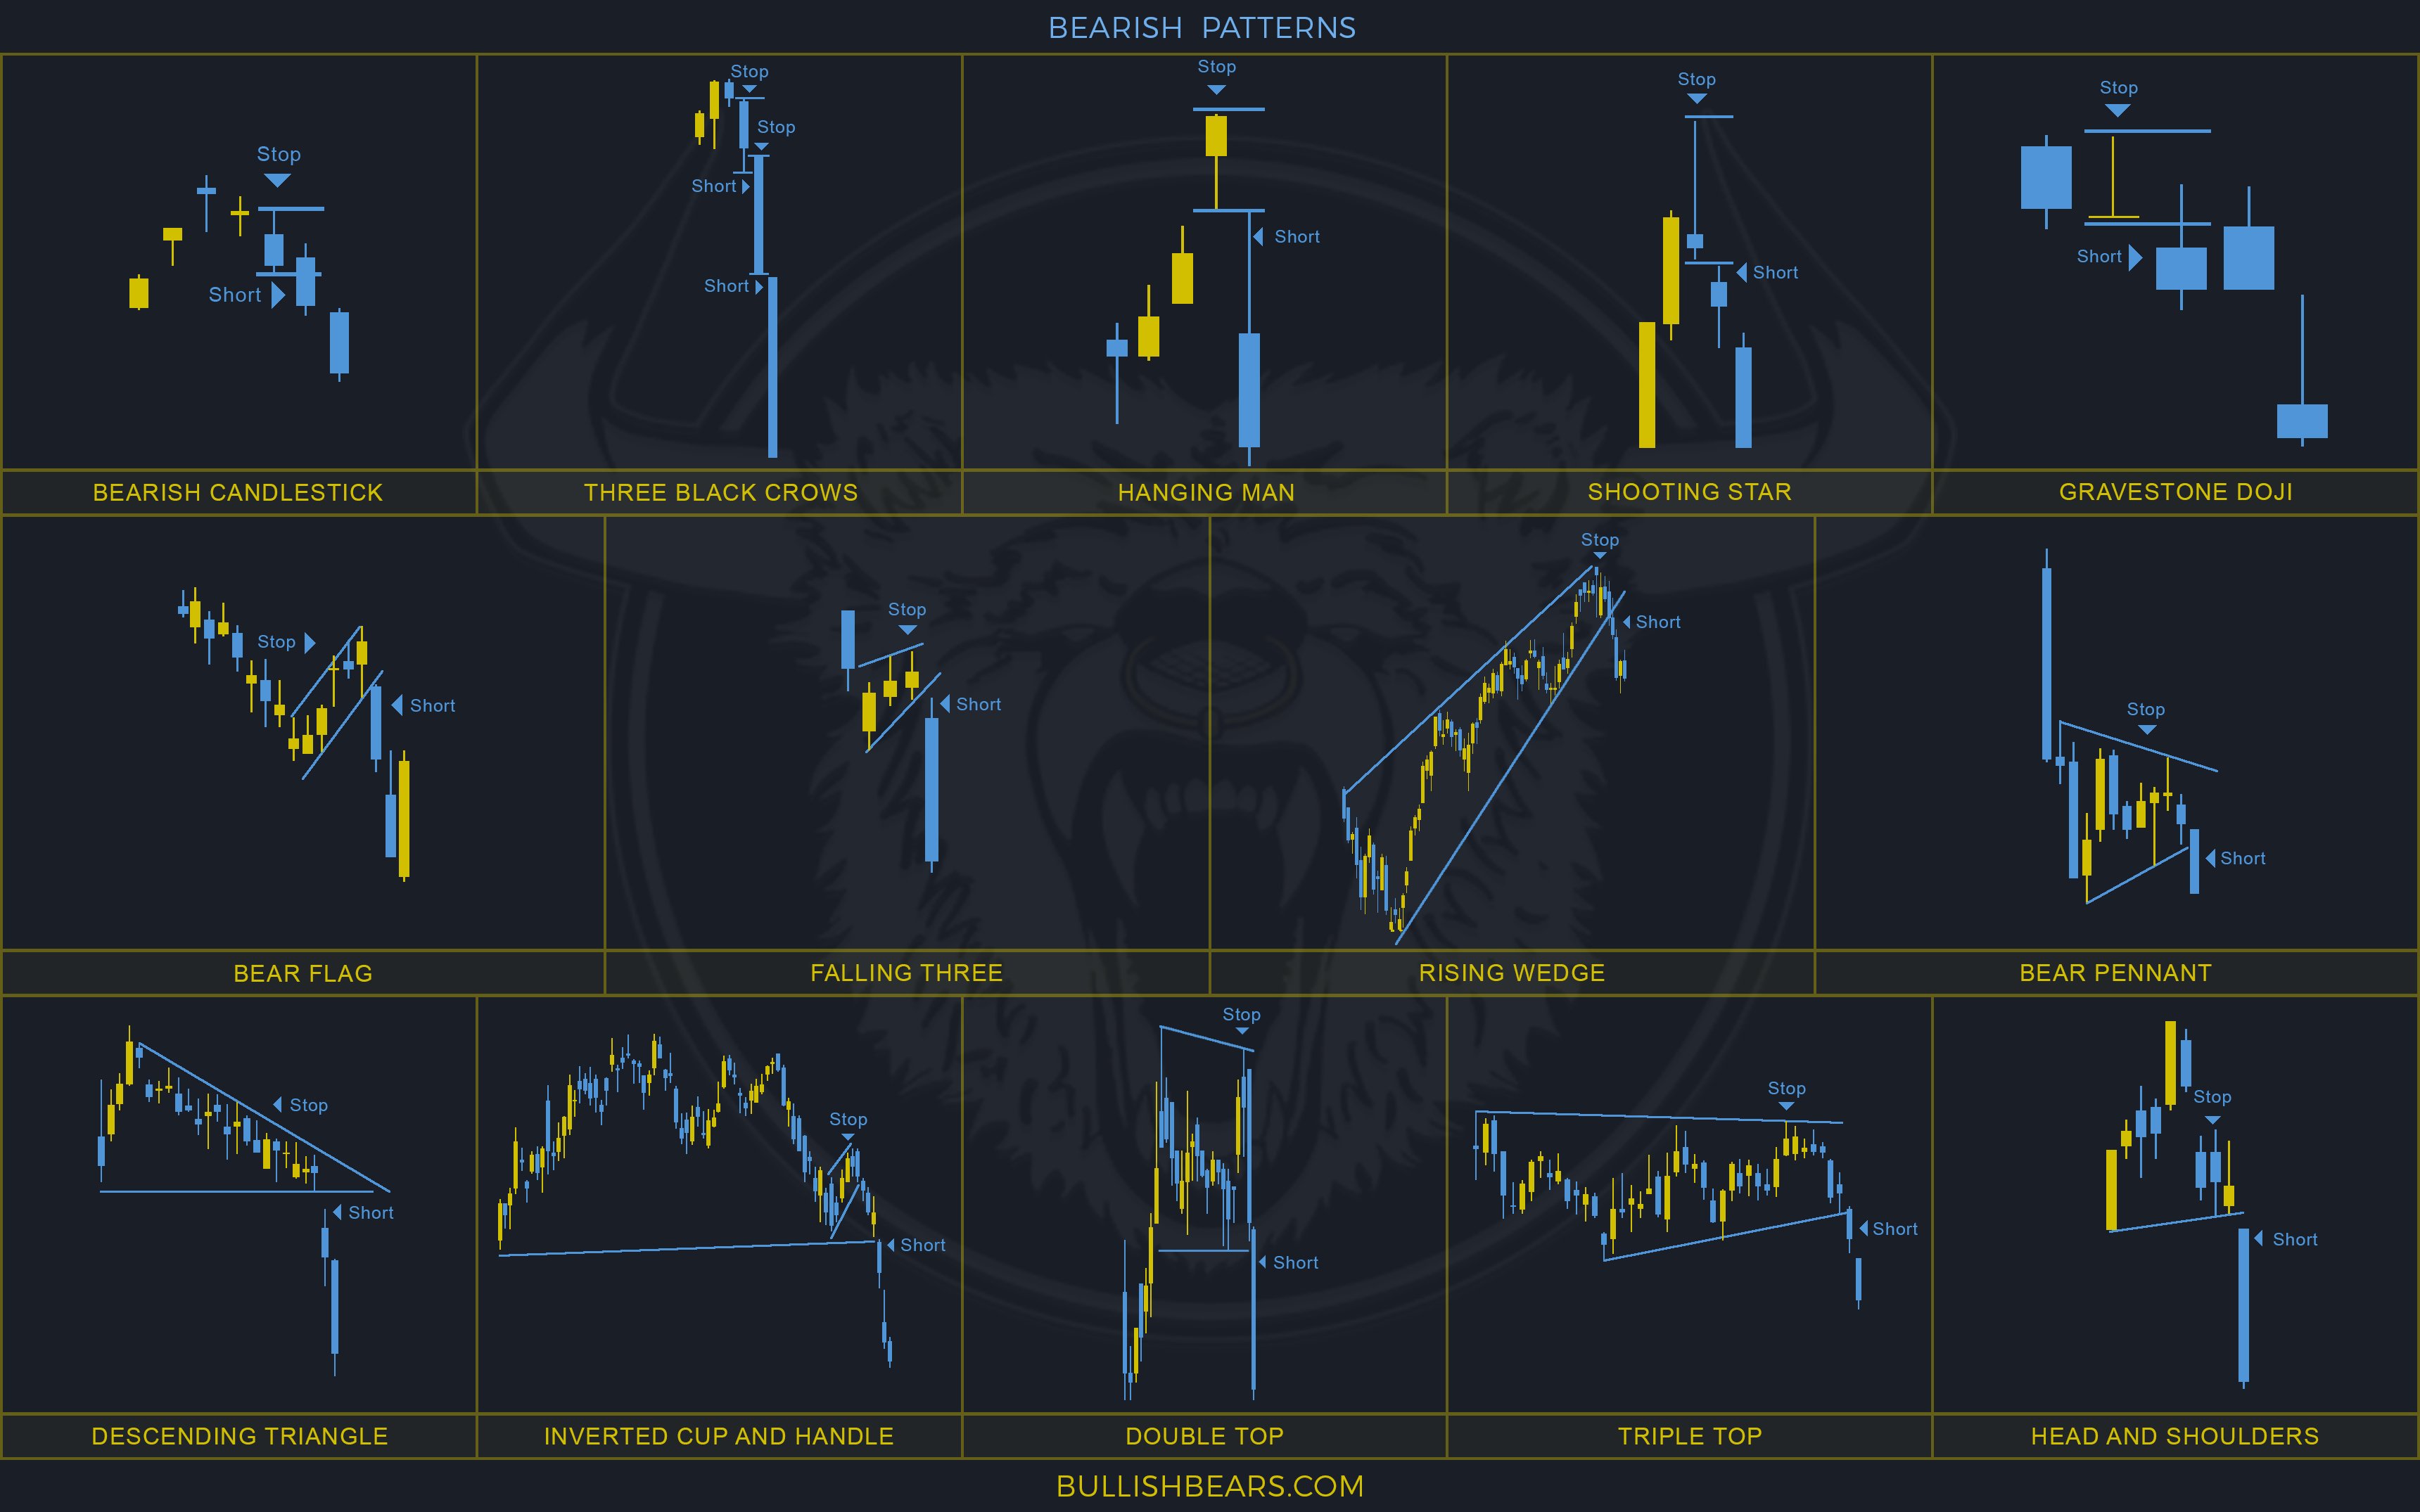 Bullish Bears Trading Community are the #wallpaper for # trading #candlesticks that you've all been waiting for! #Stocks #trade #daytrader #swingtrader #stockmarket #money #forext #crypto #investing #invest #daytrade #swingtrade